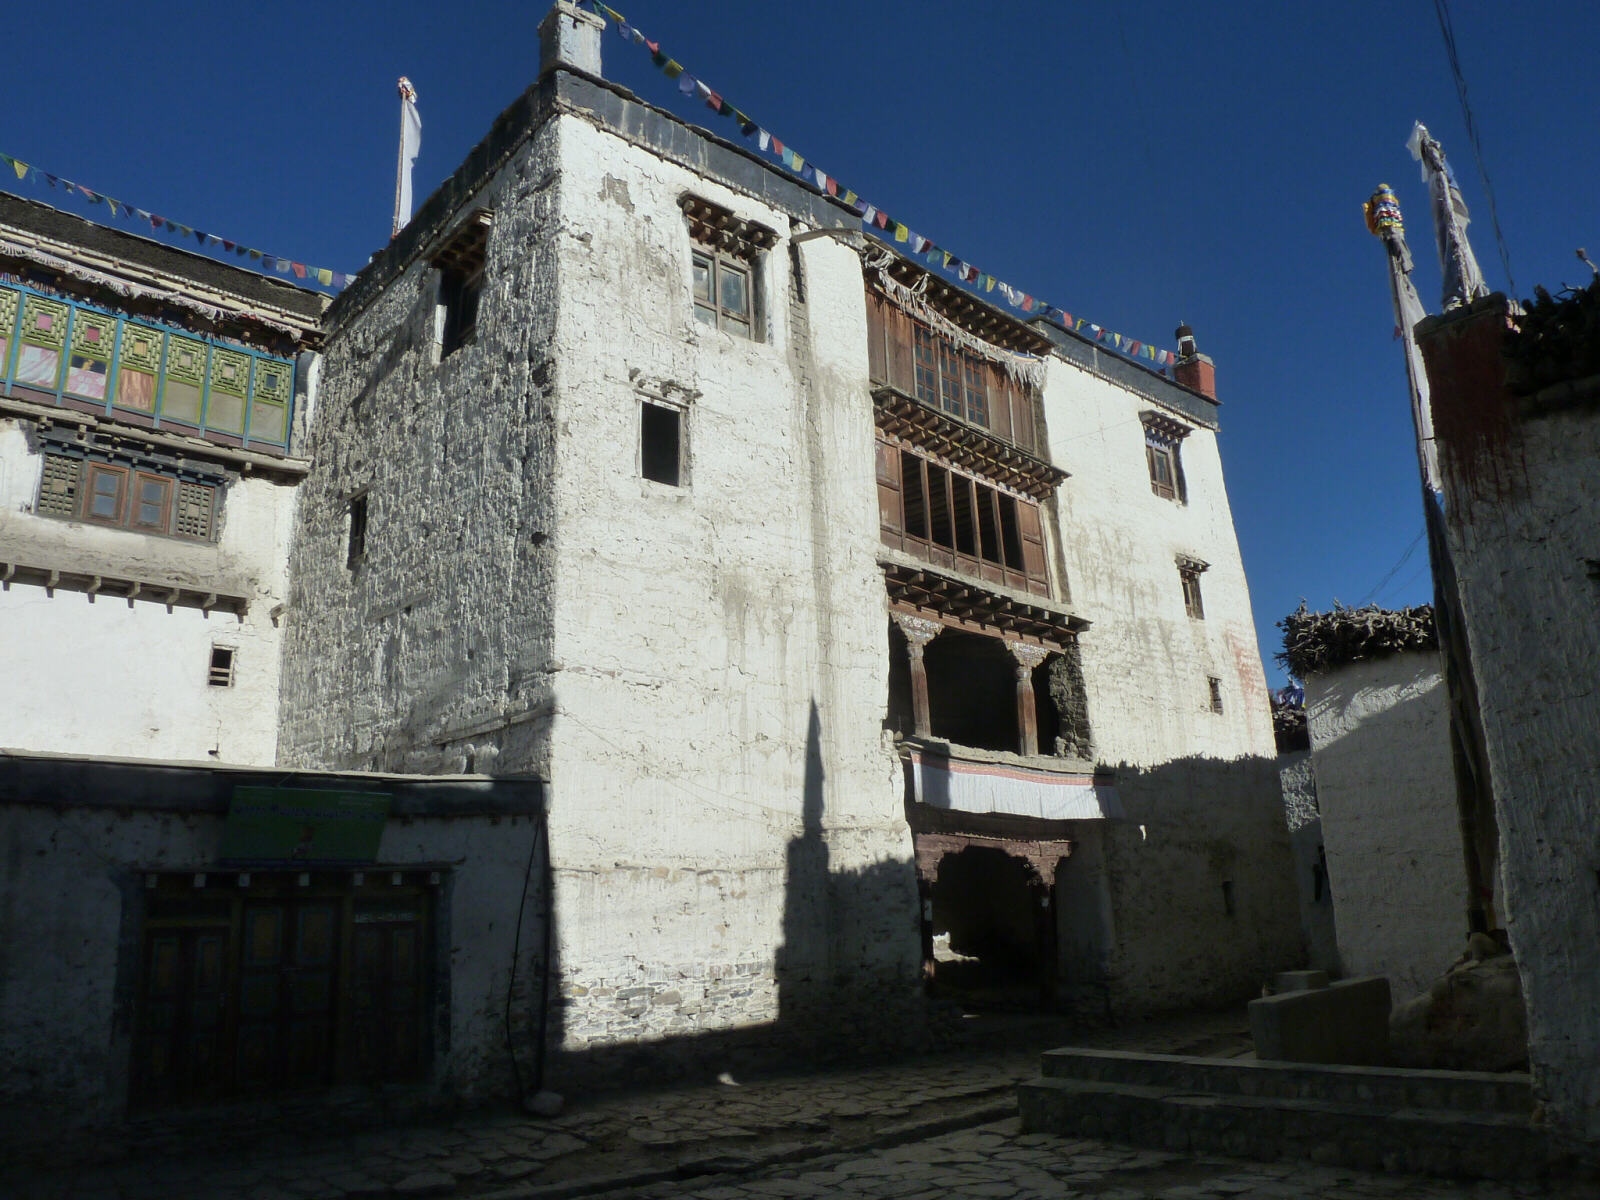 The Kings palace in the main square of Lo Manthang, Nepal